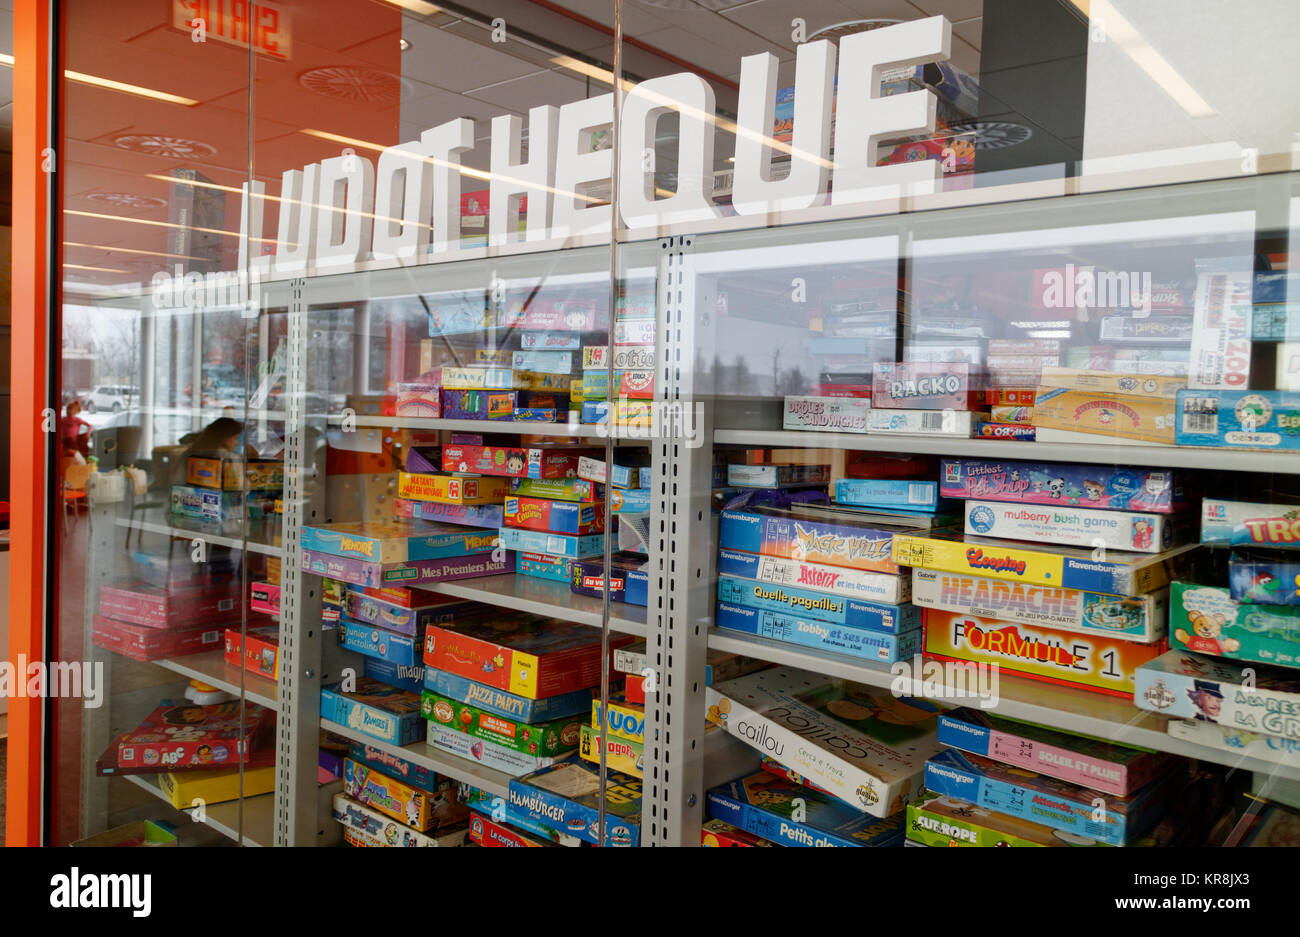 The Ludotheque toys and games library in Quebec City Stock Photo